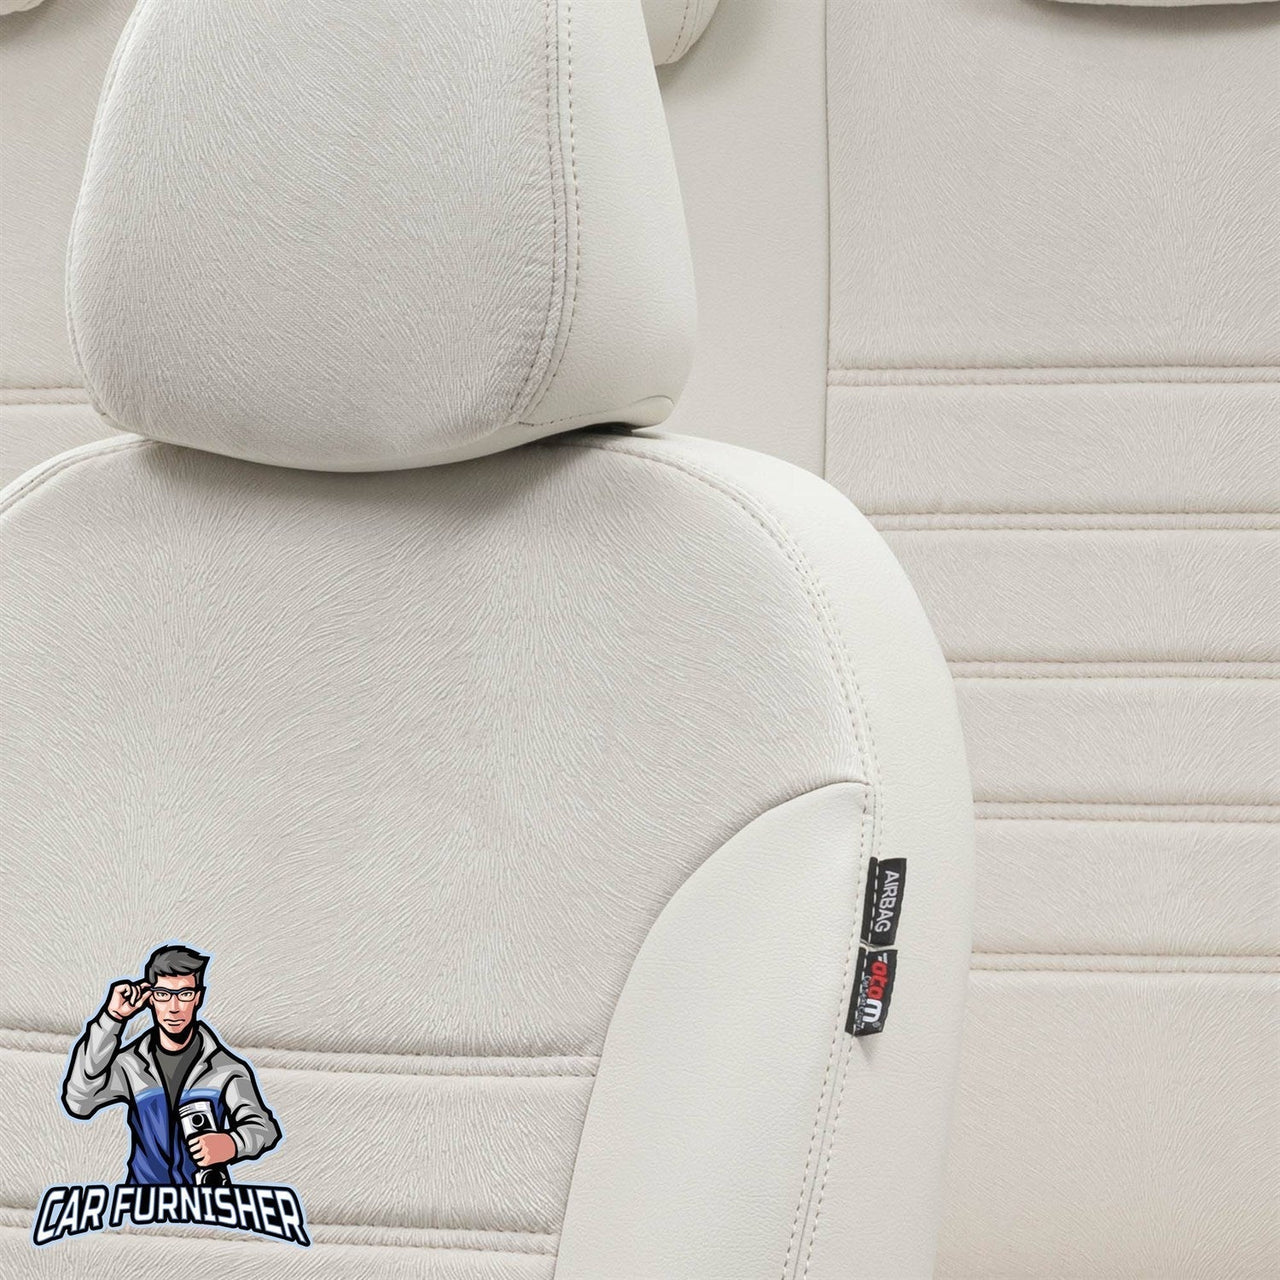 Chevrolet Spark Seat Covers London Foal Feather Design Ivory Leather & Foal Feather